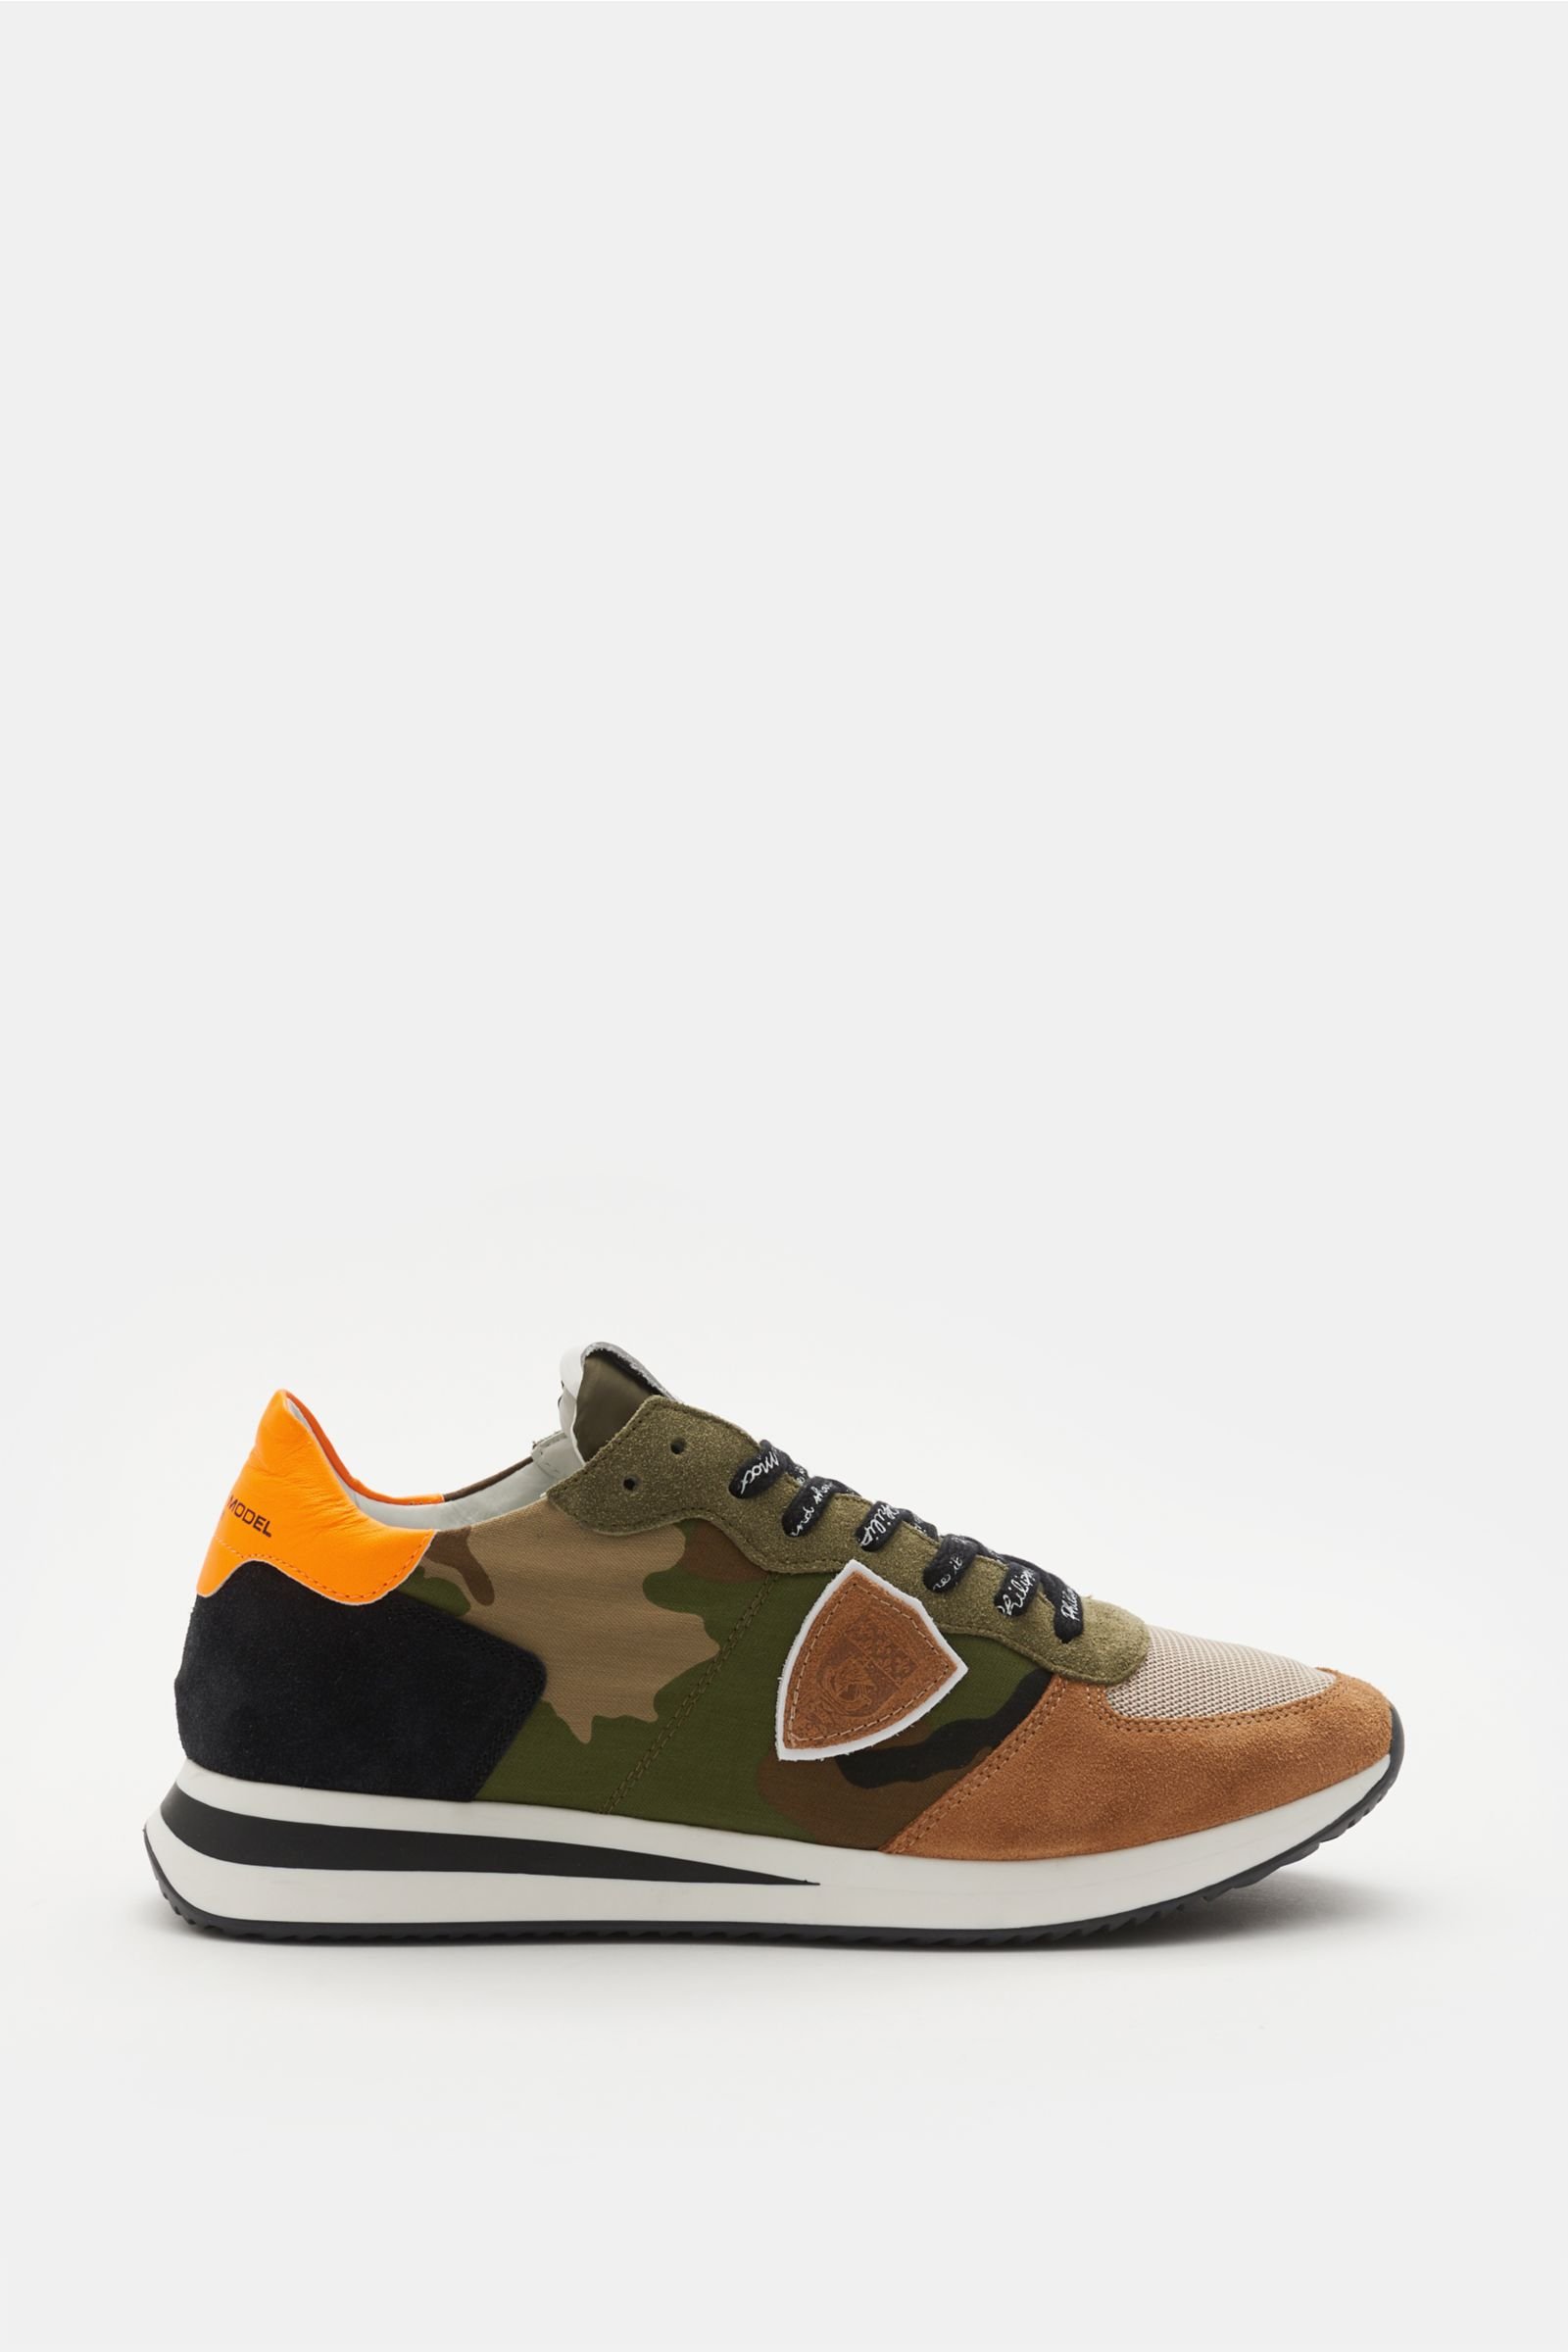 Sneakers 'Trpx Camouflage' olive/light brown patterned